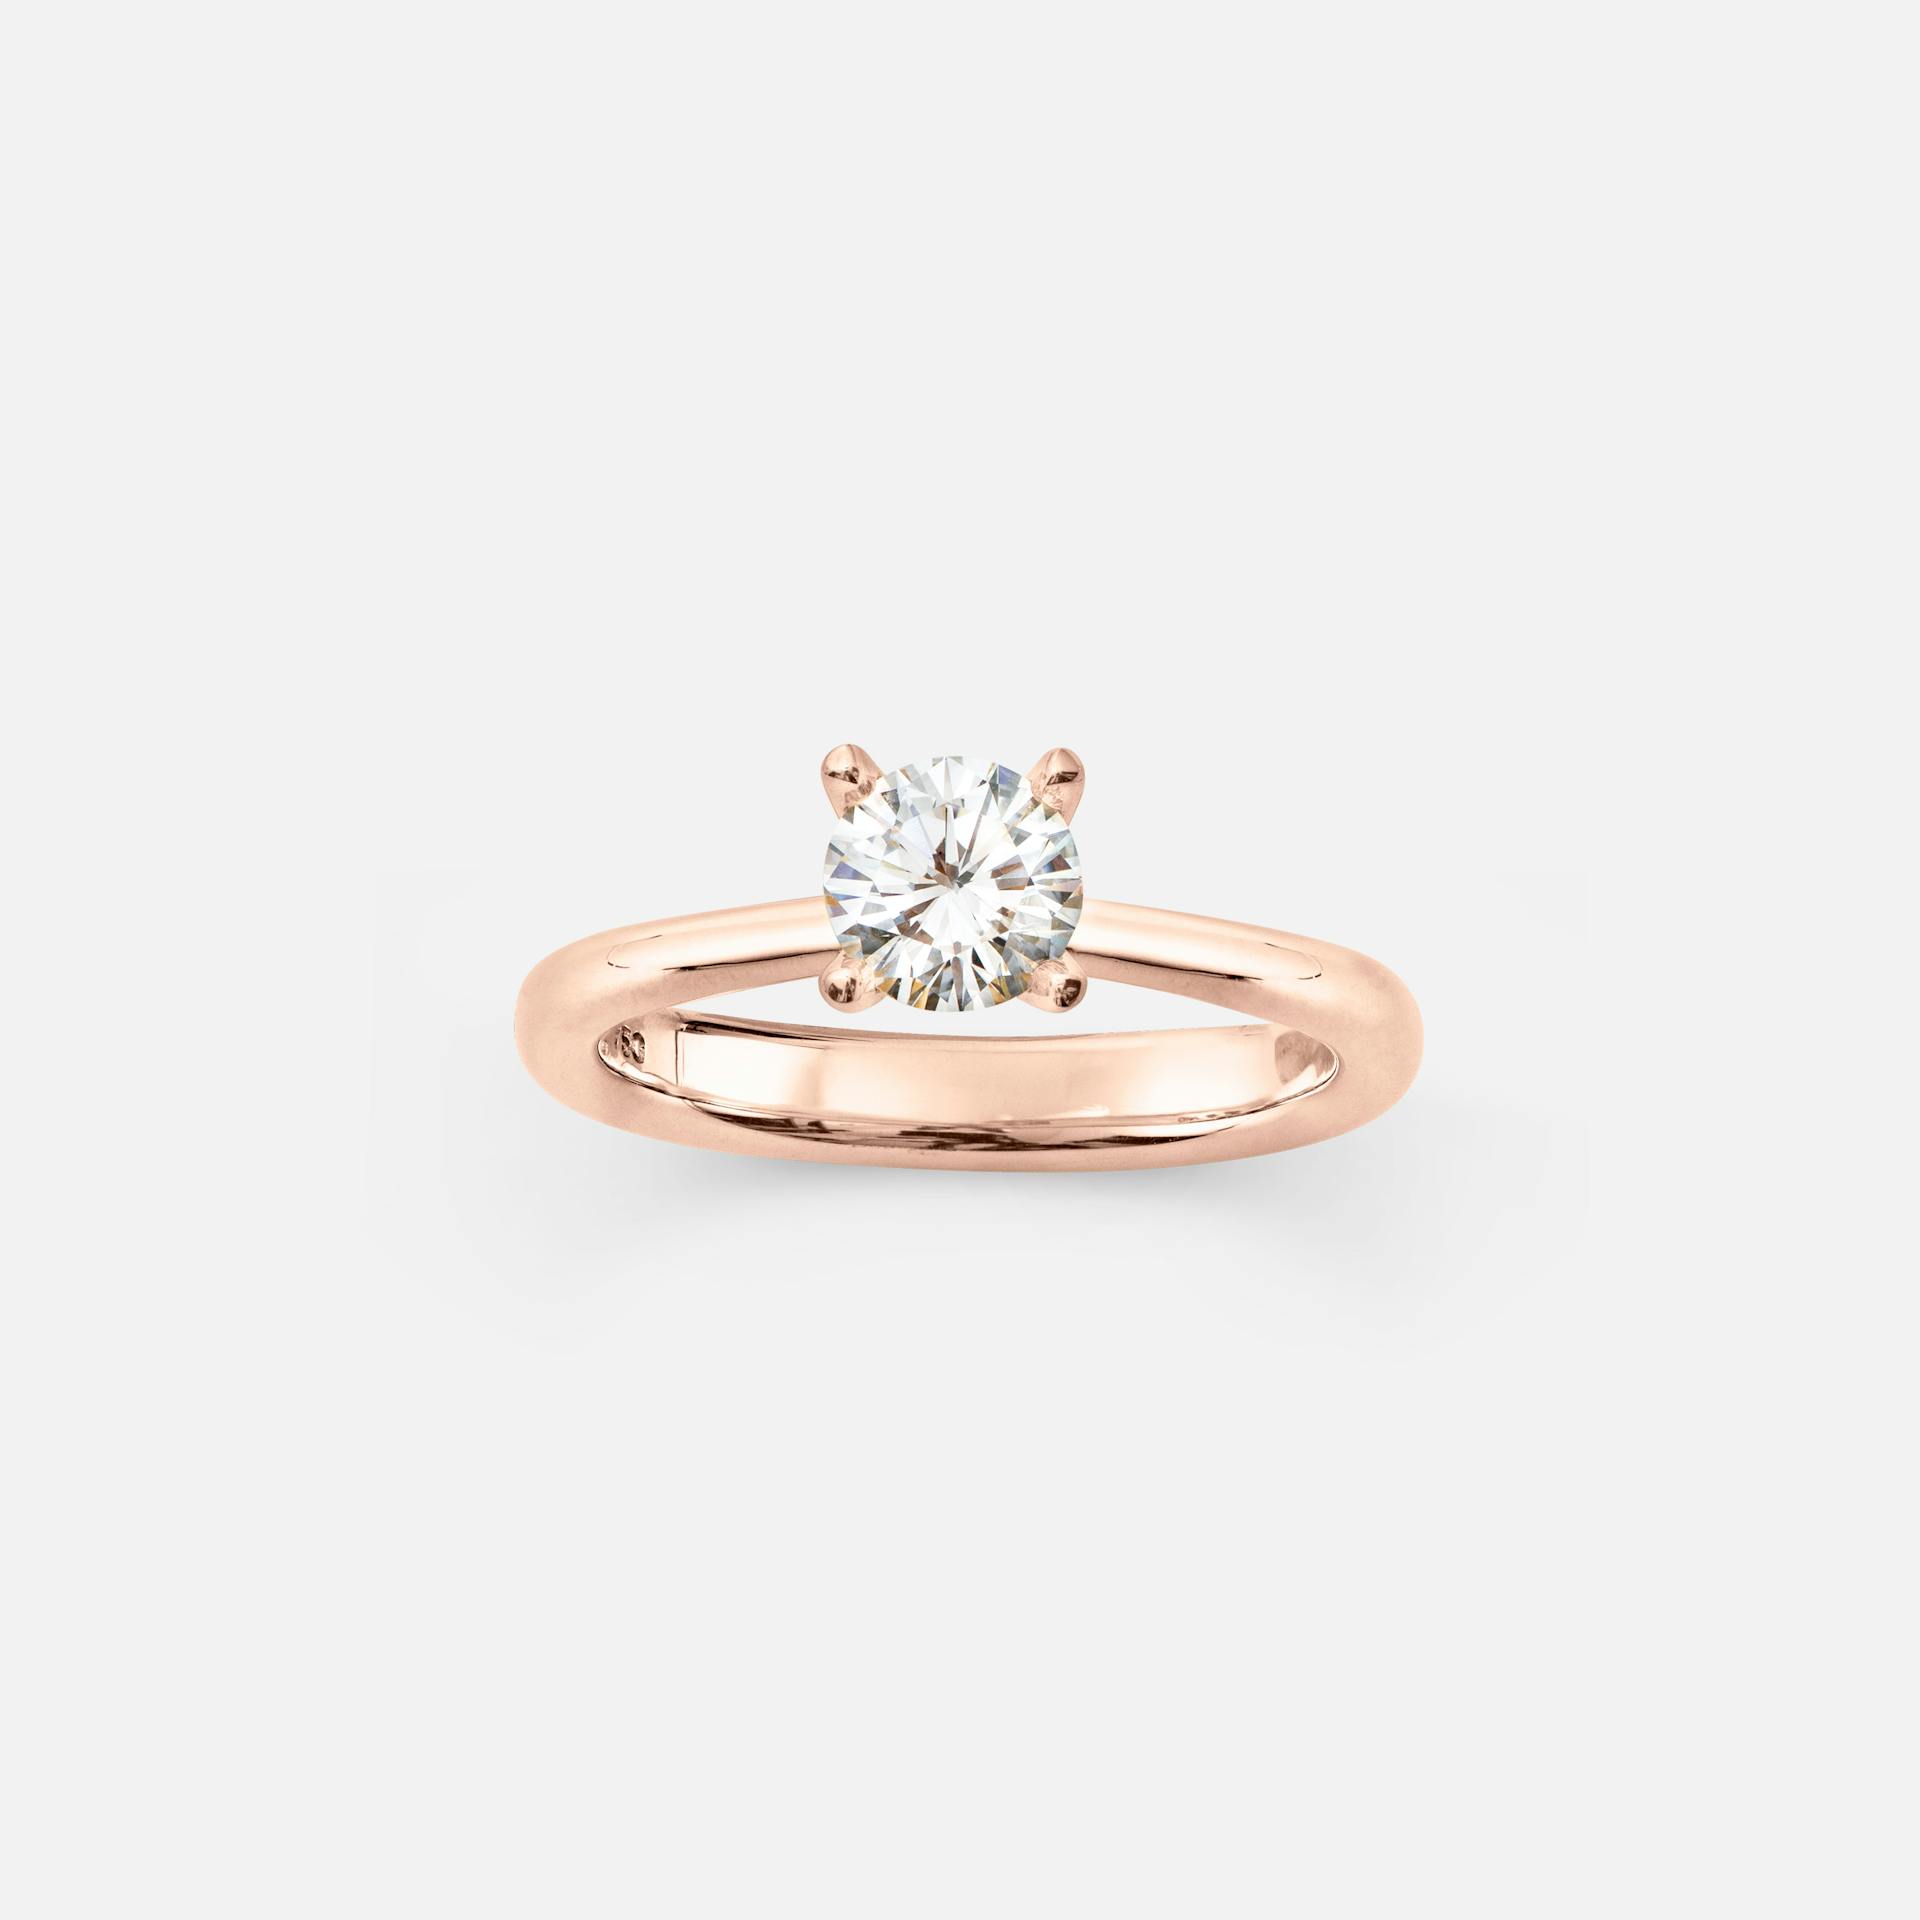 Solitaire necklace 18k rose gold set with a brilliant-cut diamond from 18k rose gold set with a brilliant-cut diamond from 0.30 ct. TW. VS.